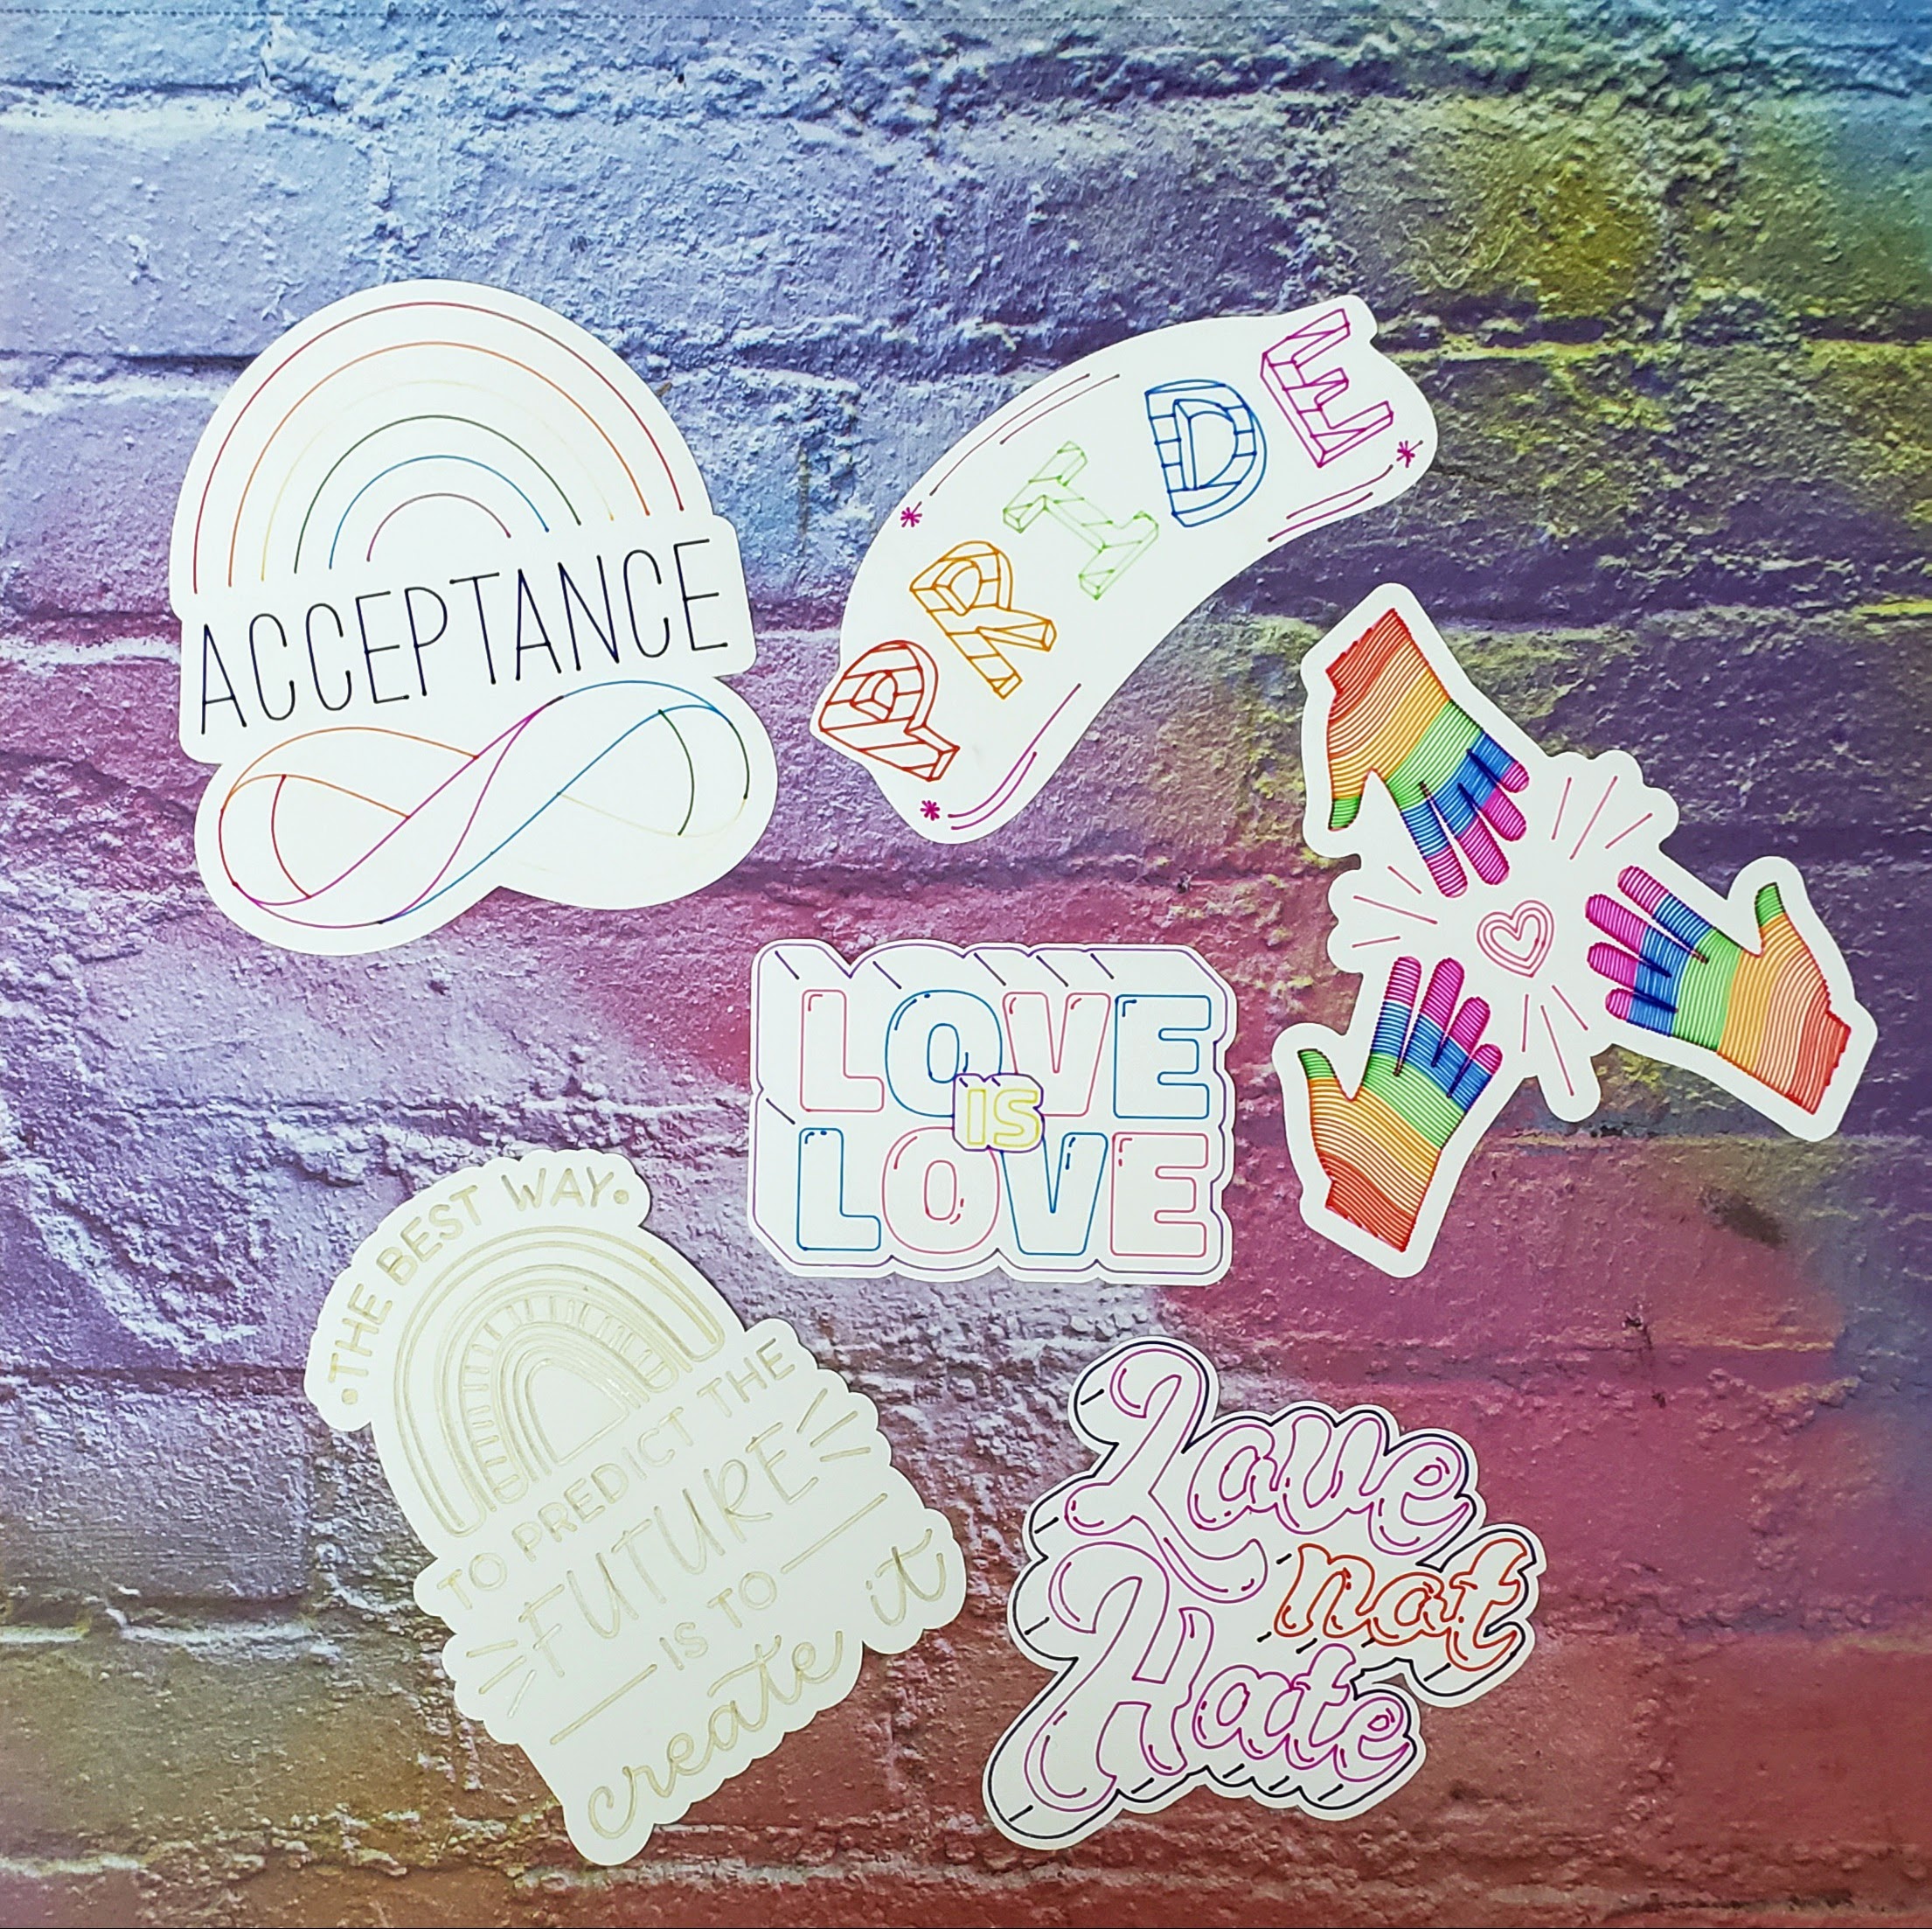 Pride stickers with sayings including "Acceptance" "Love is Love" "Love not Hate" and "The best way to predict the future is to create it"